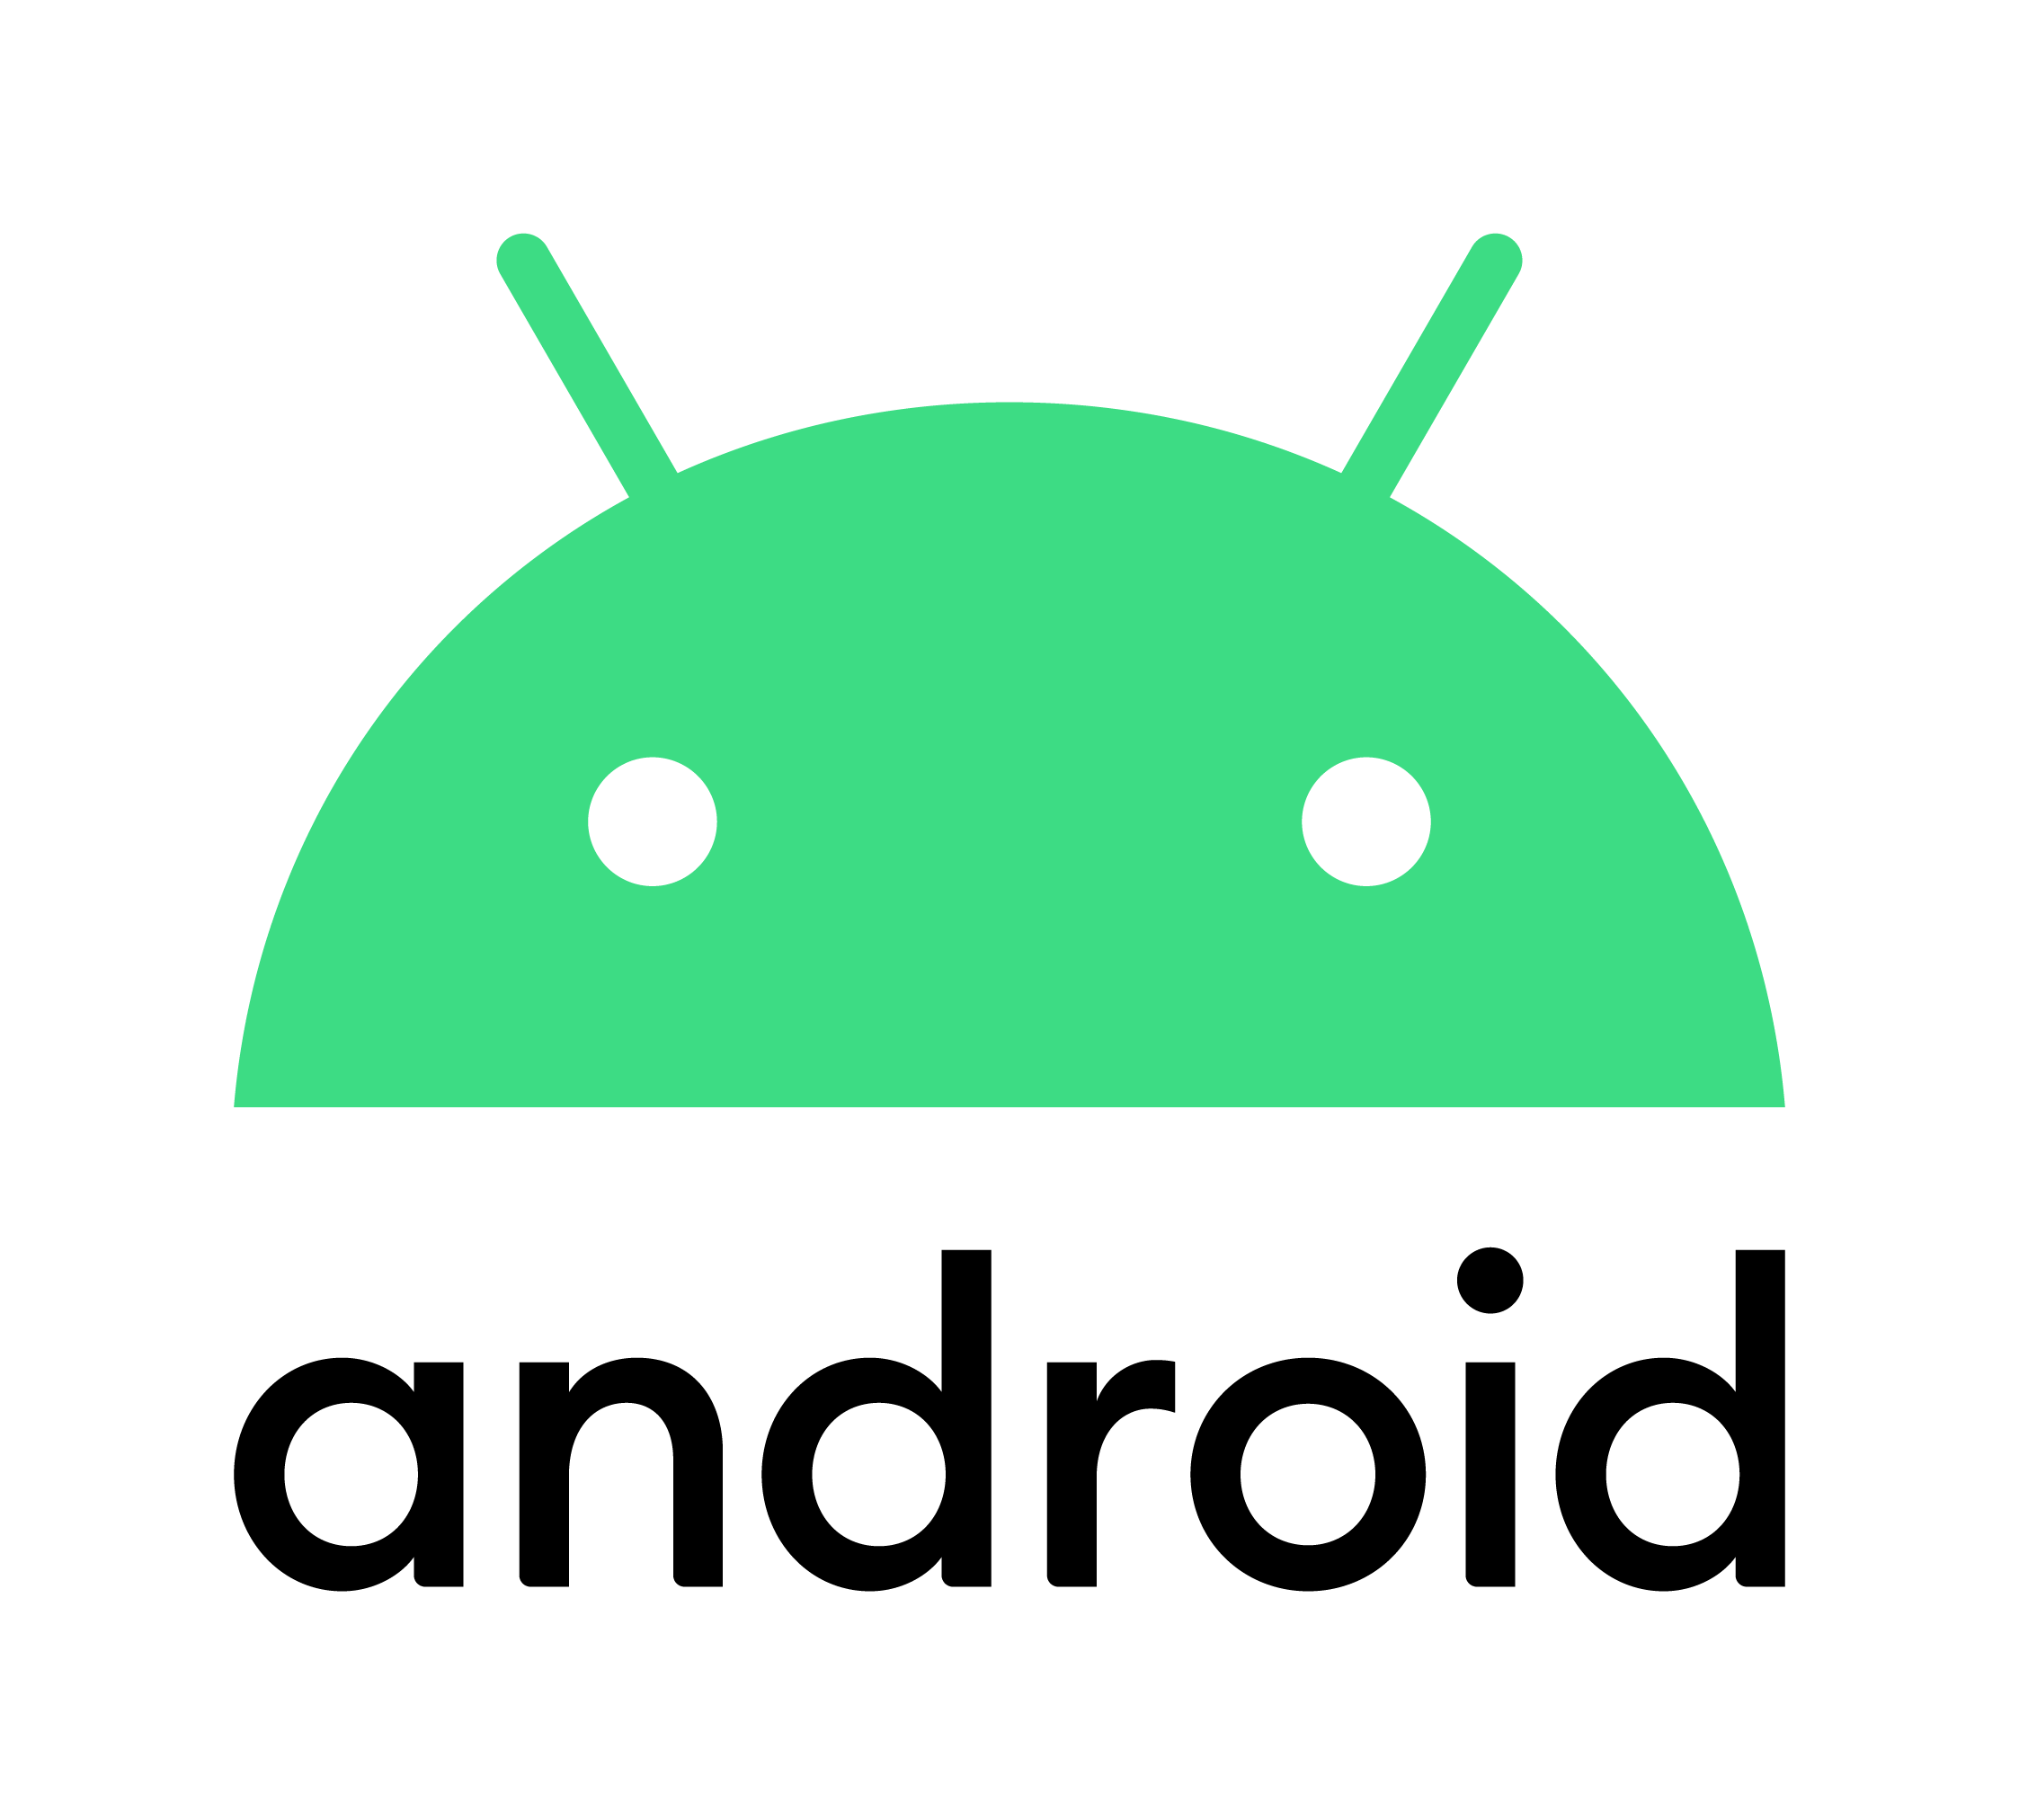 Android_master_logo_stacked_RGB (002)